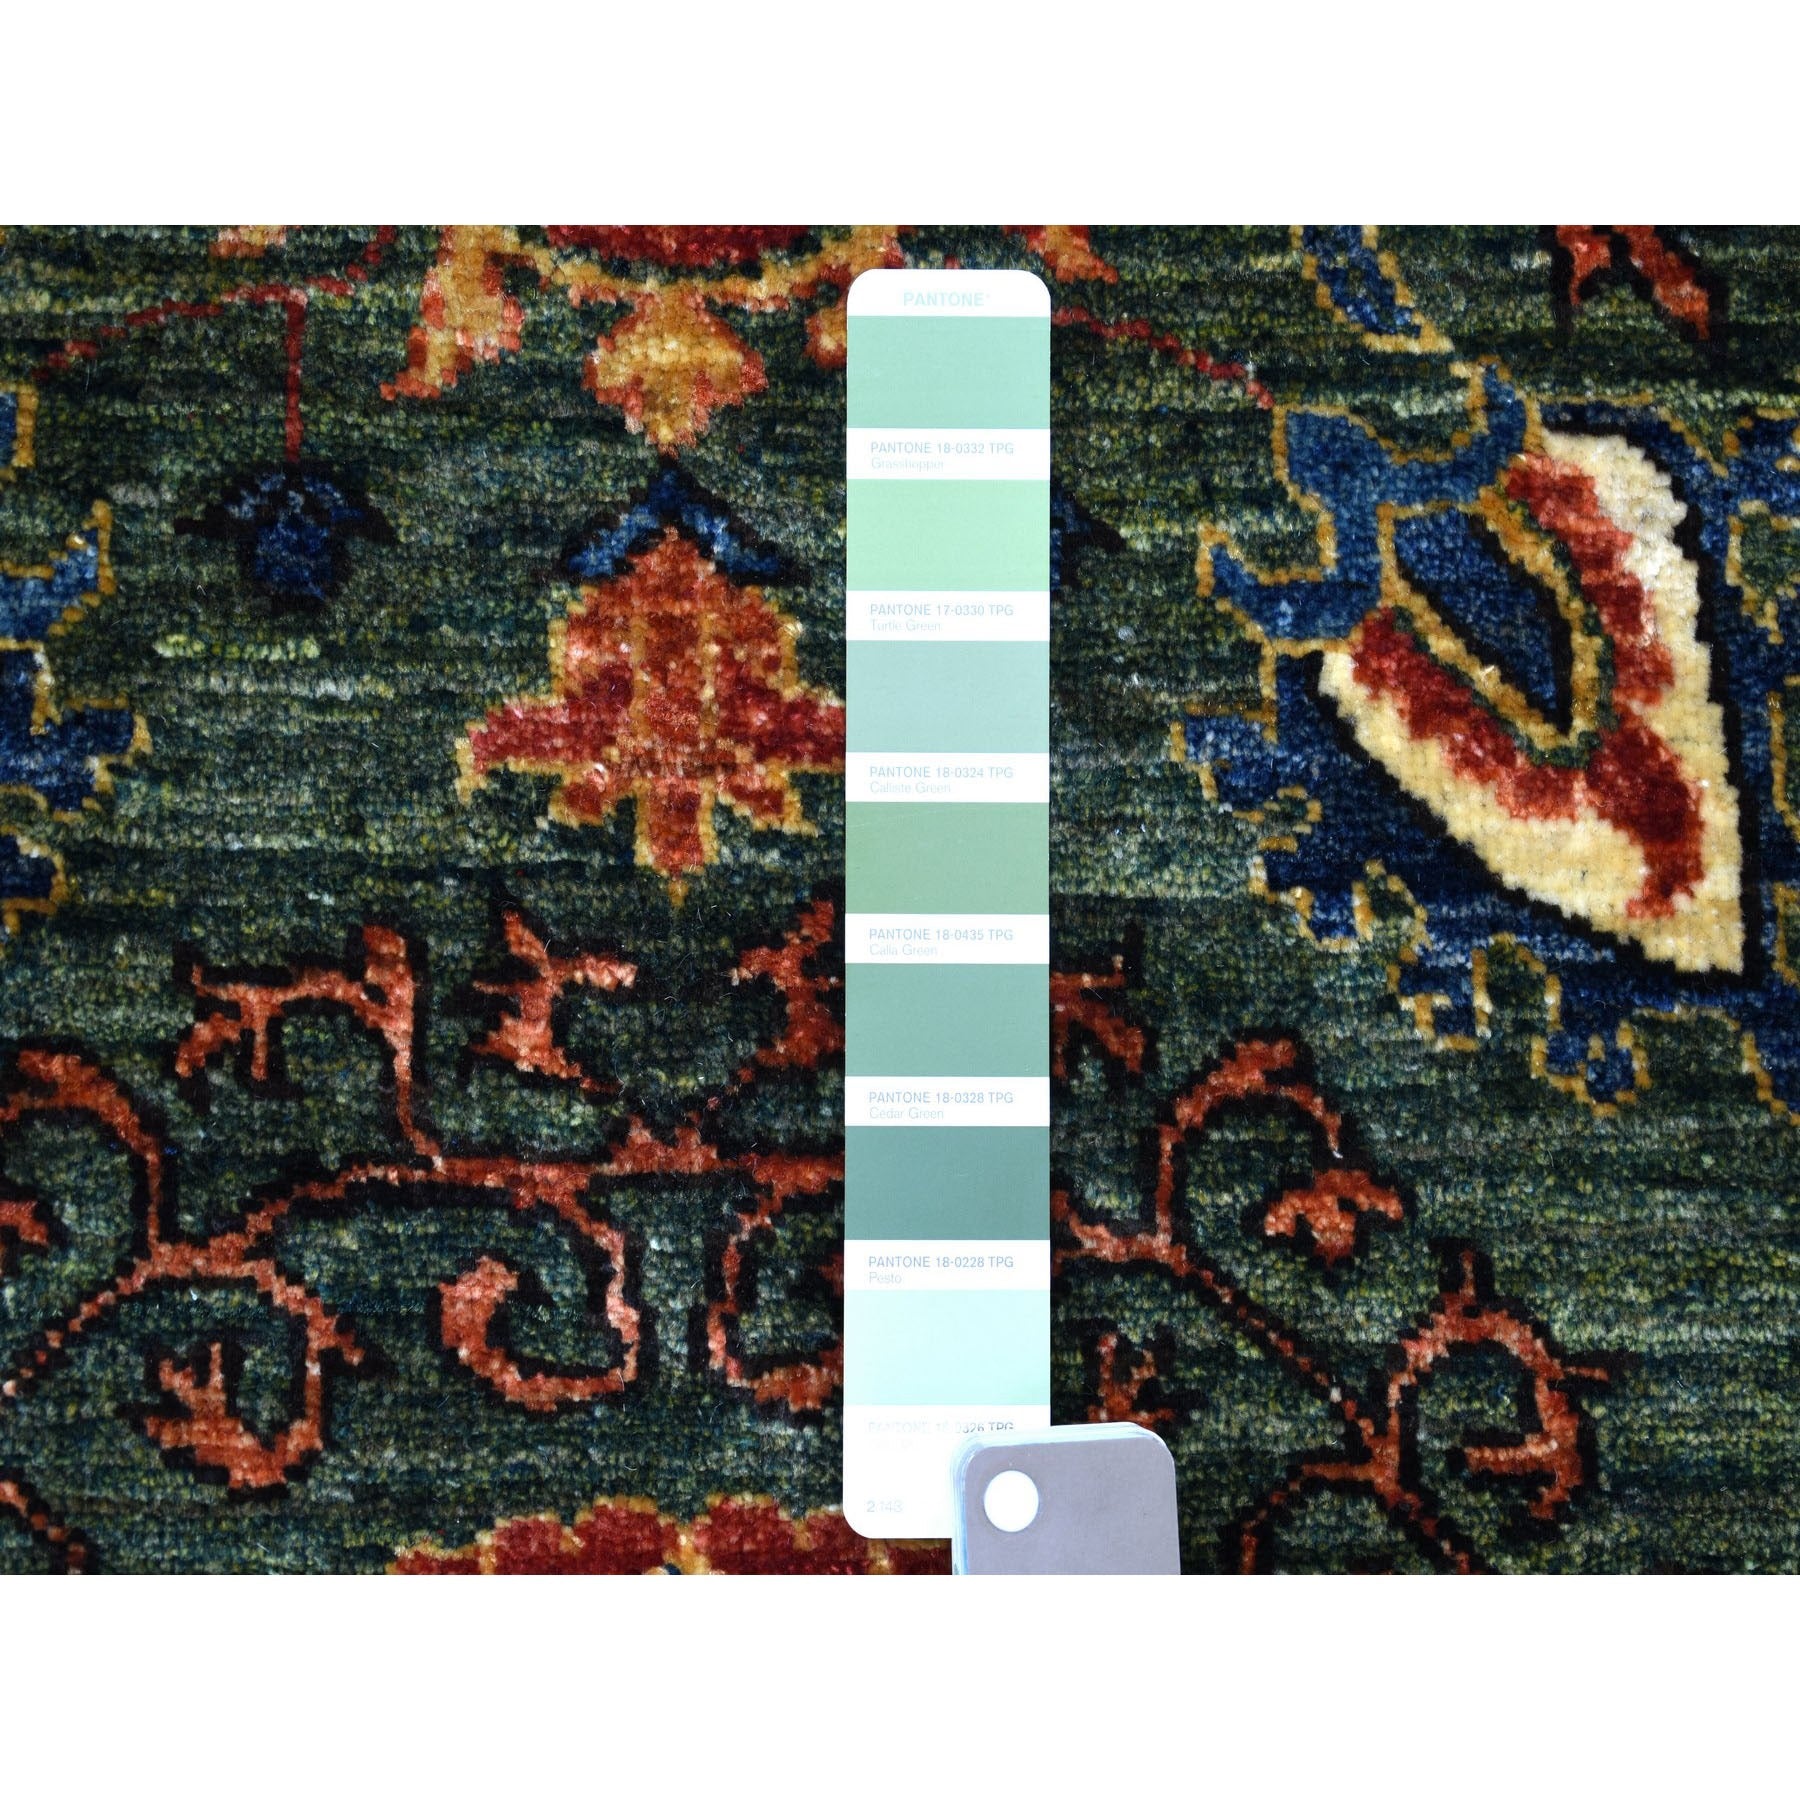 Hand Knotted Tribal Runner > Design# CCSR56752 > Size: 2'-9" x 9'-7"